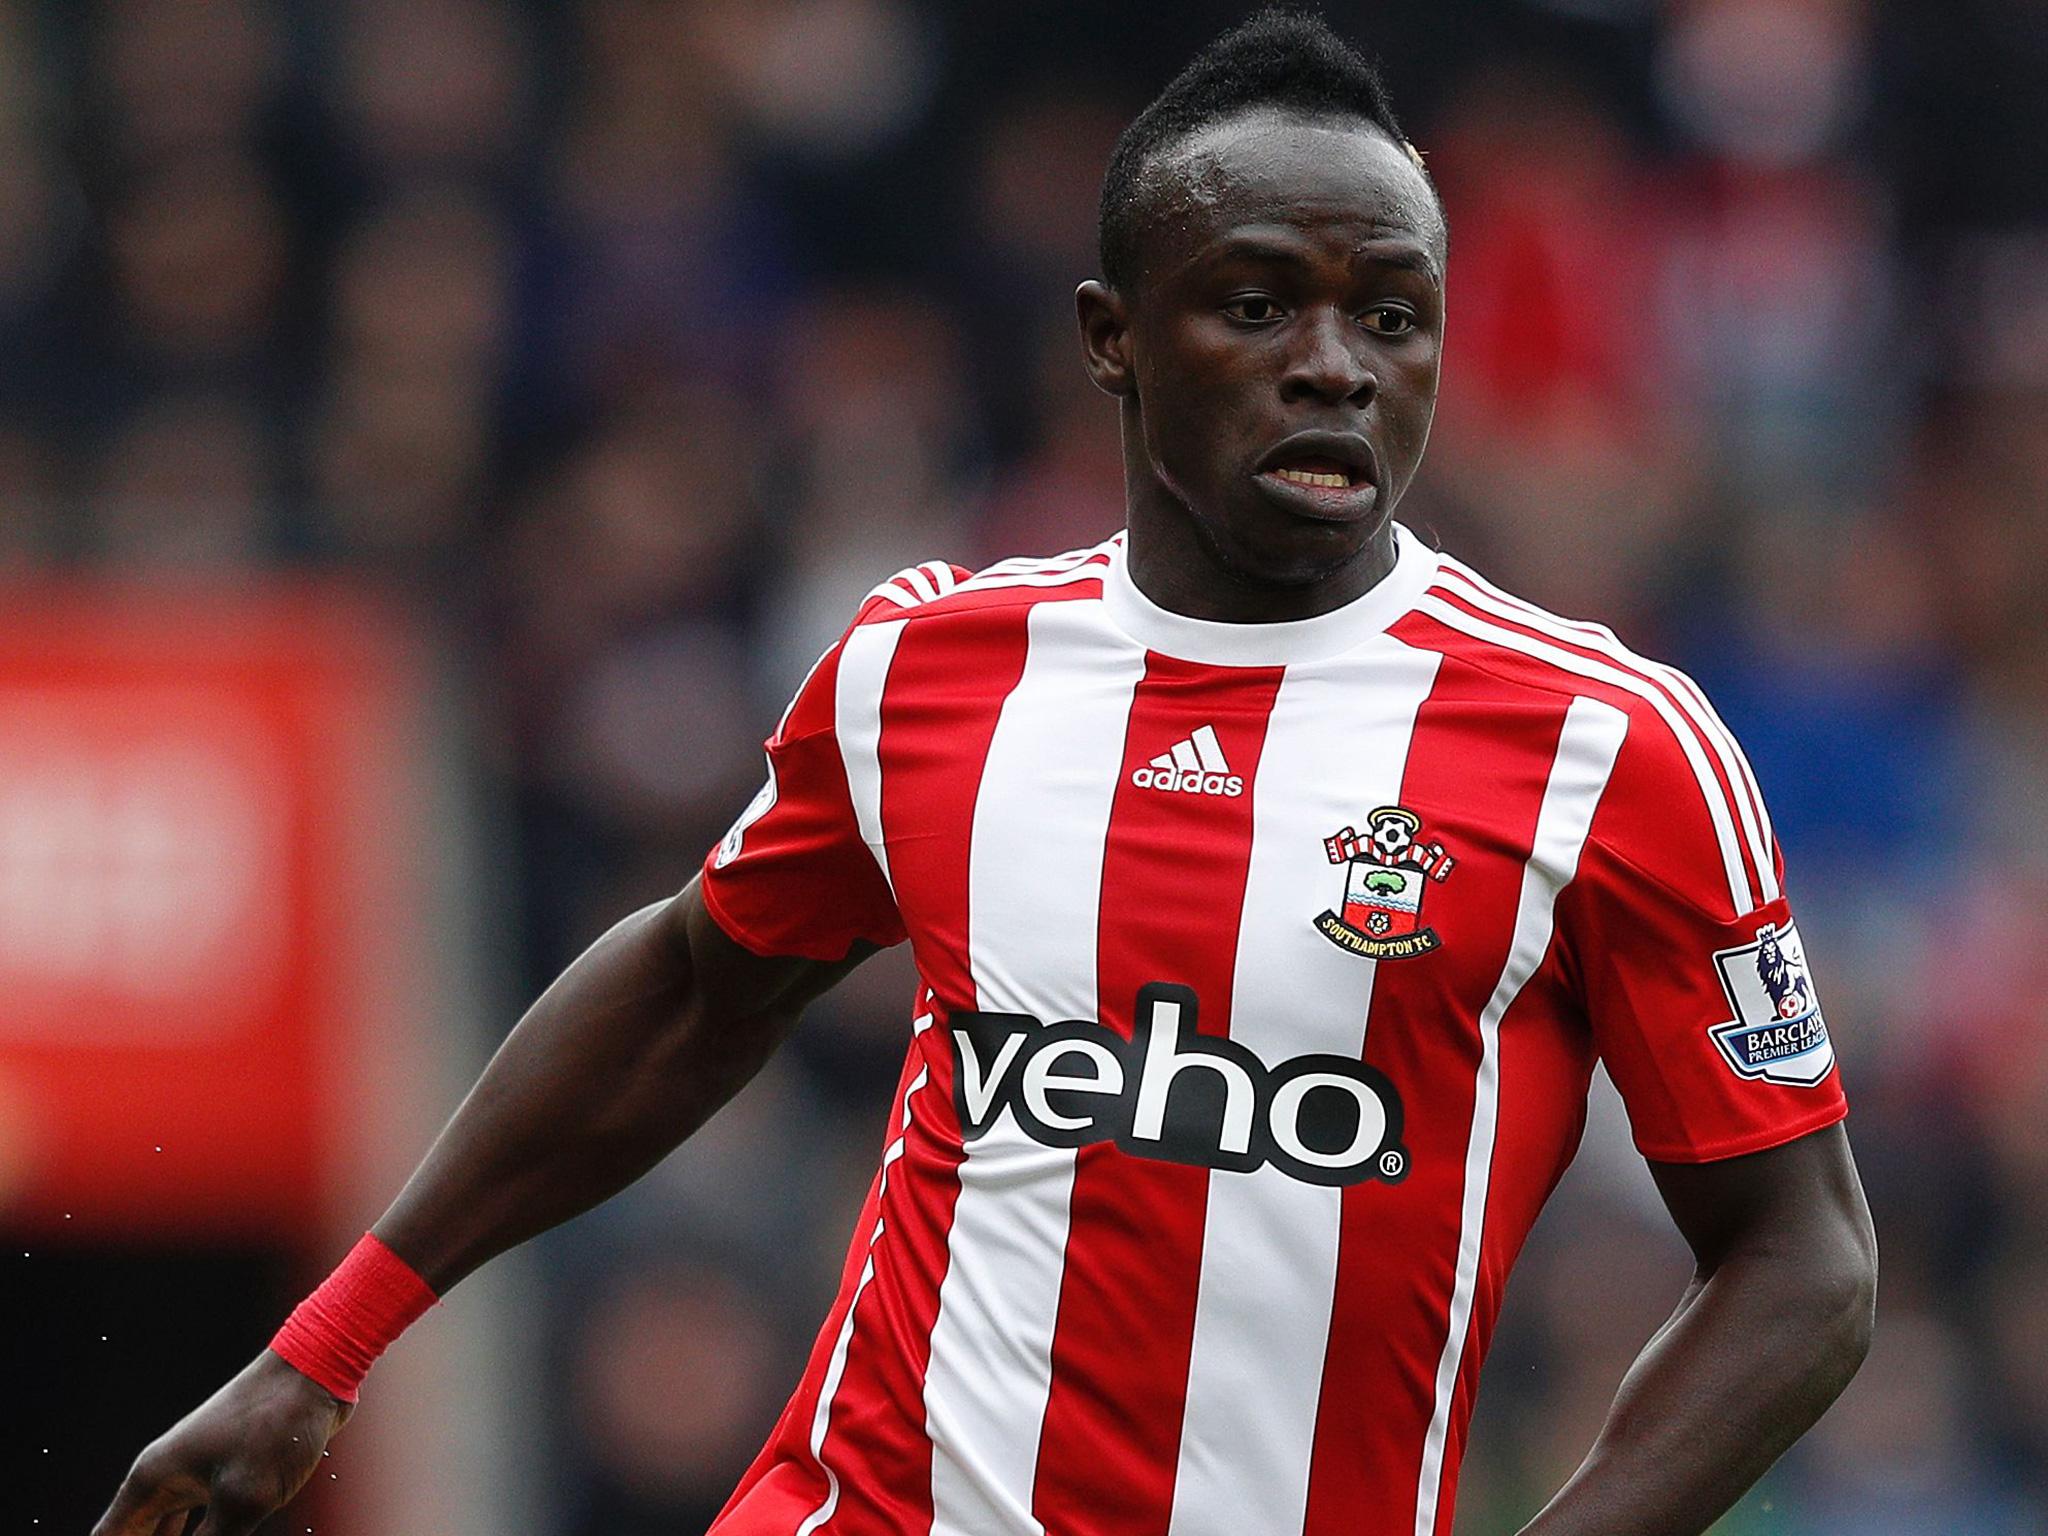 Mane joined Southampton from Red Bull Salzburg in 2014